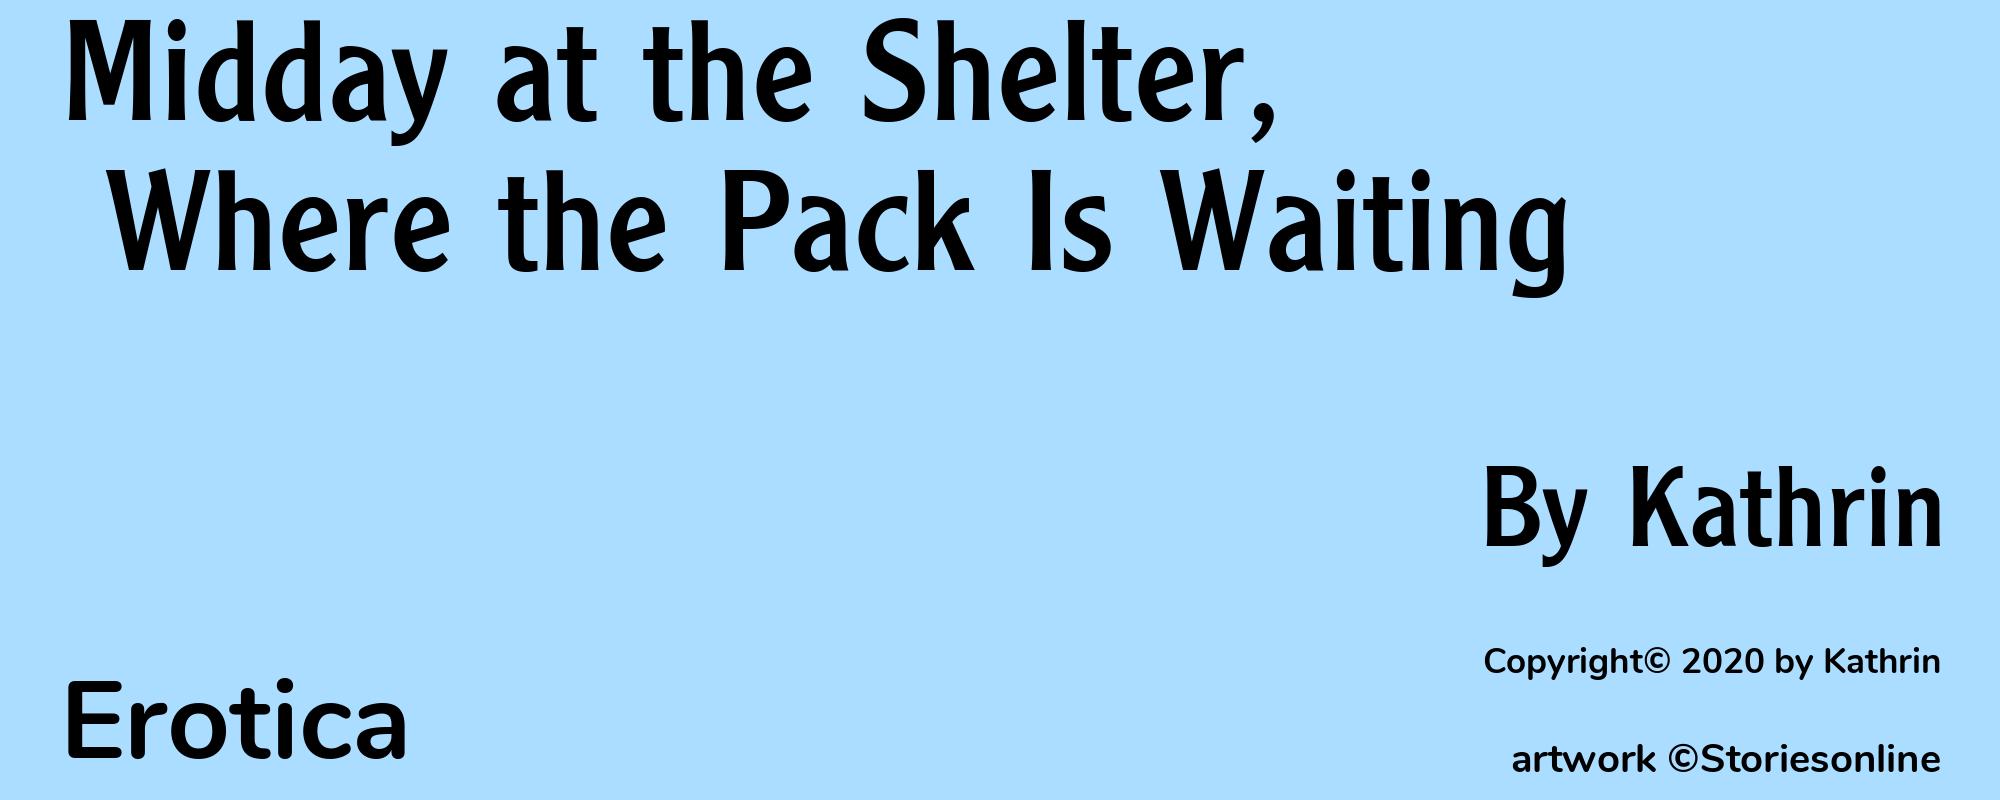 Midday at the Shelter, Where the Pack Is Waiting - Cover